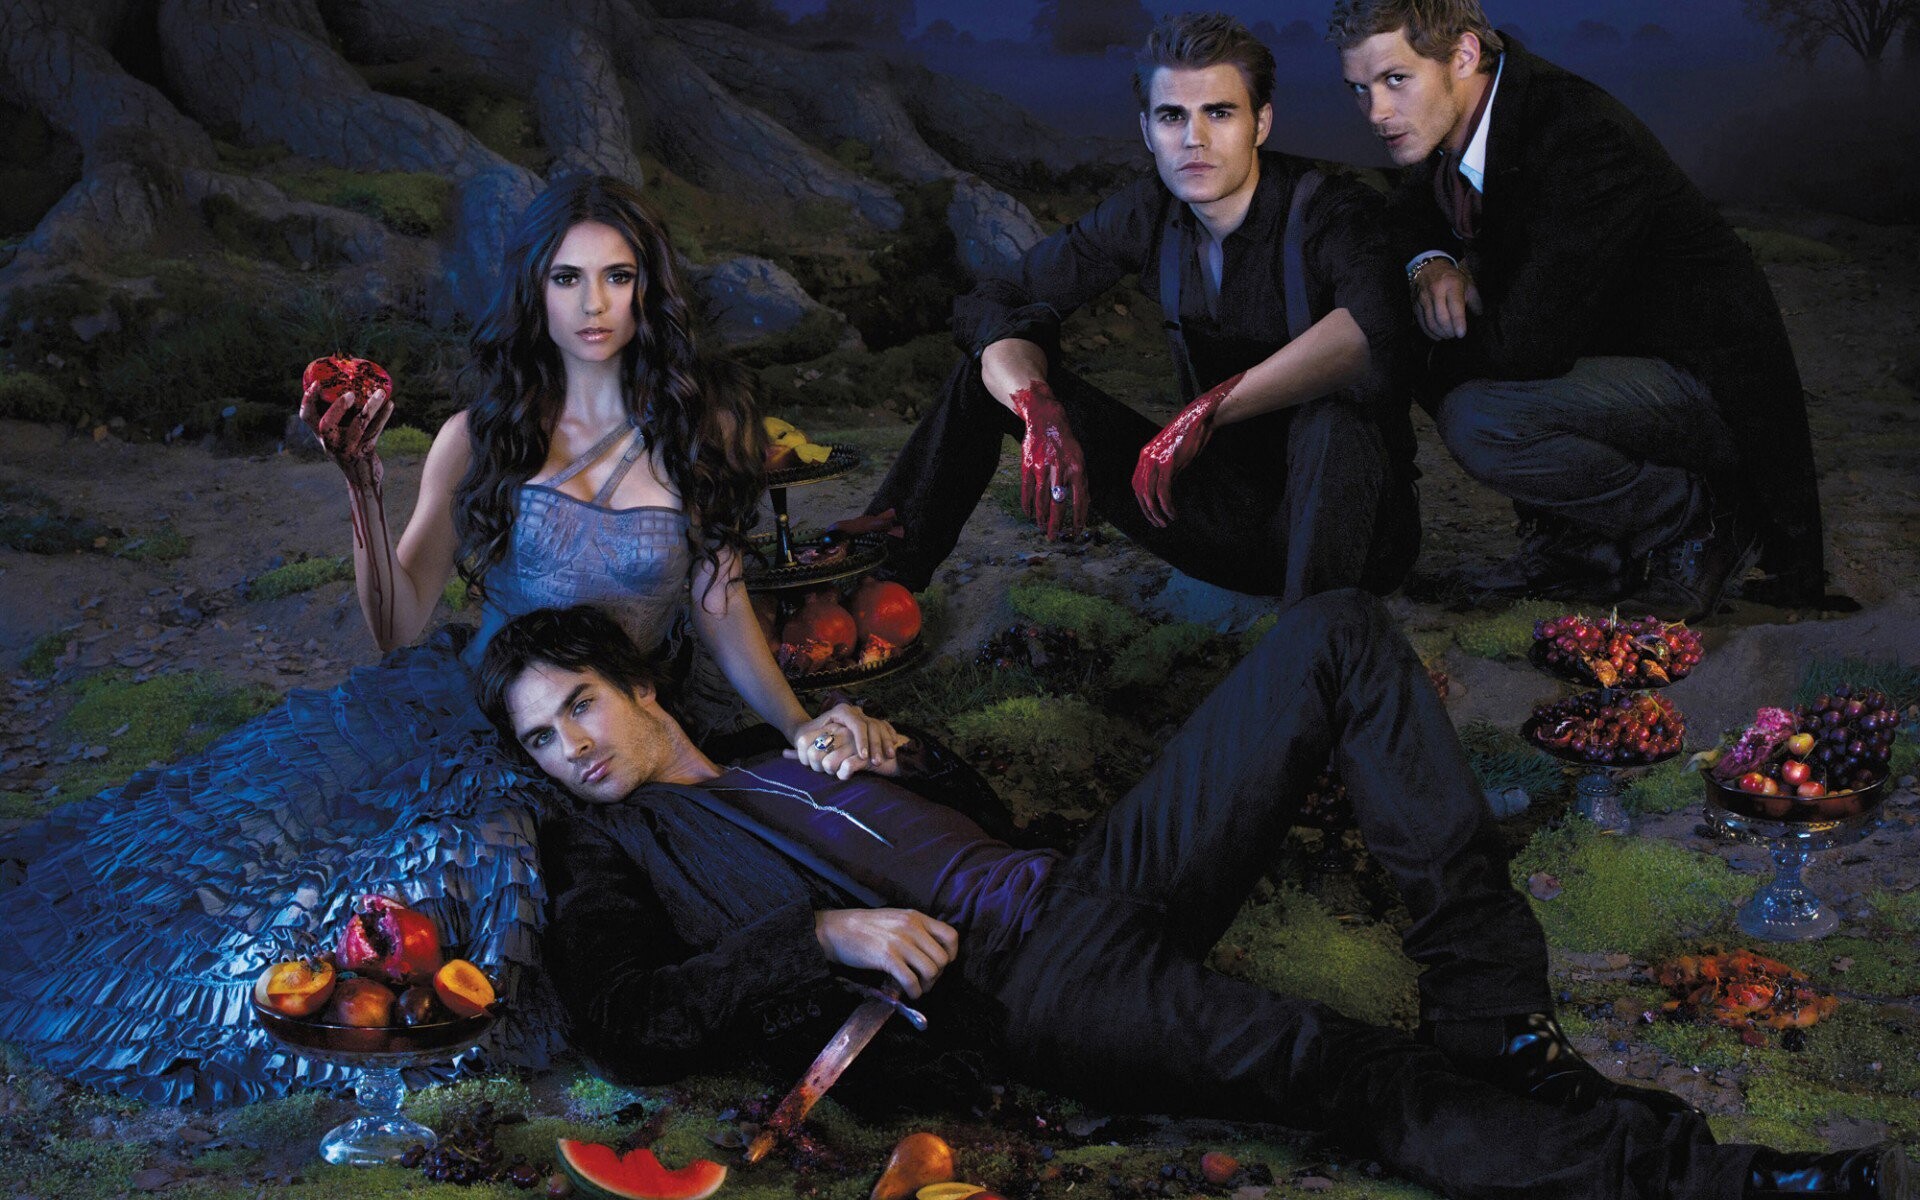 The Vampire Diaries (TV Series): Blood, The Petrova Family, The Salvatore Family, Amara - The World's First Immortal Woman. 1920x1200 HD Wallpaper.